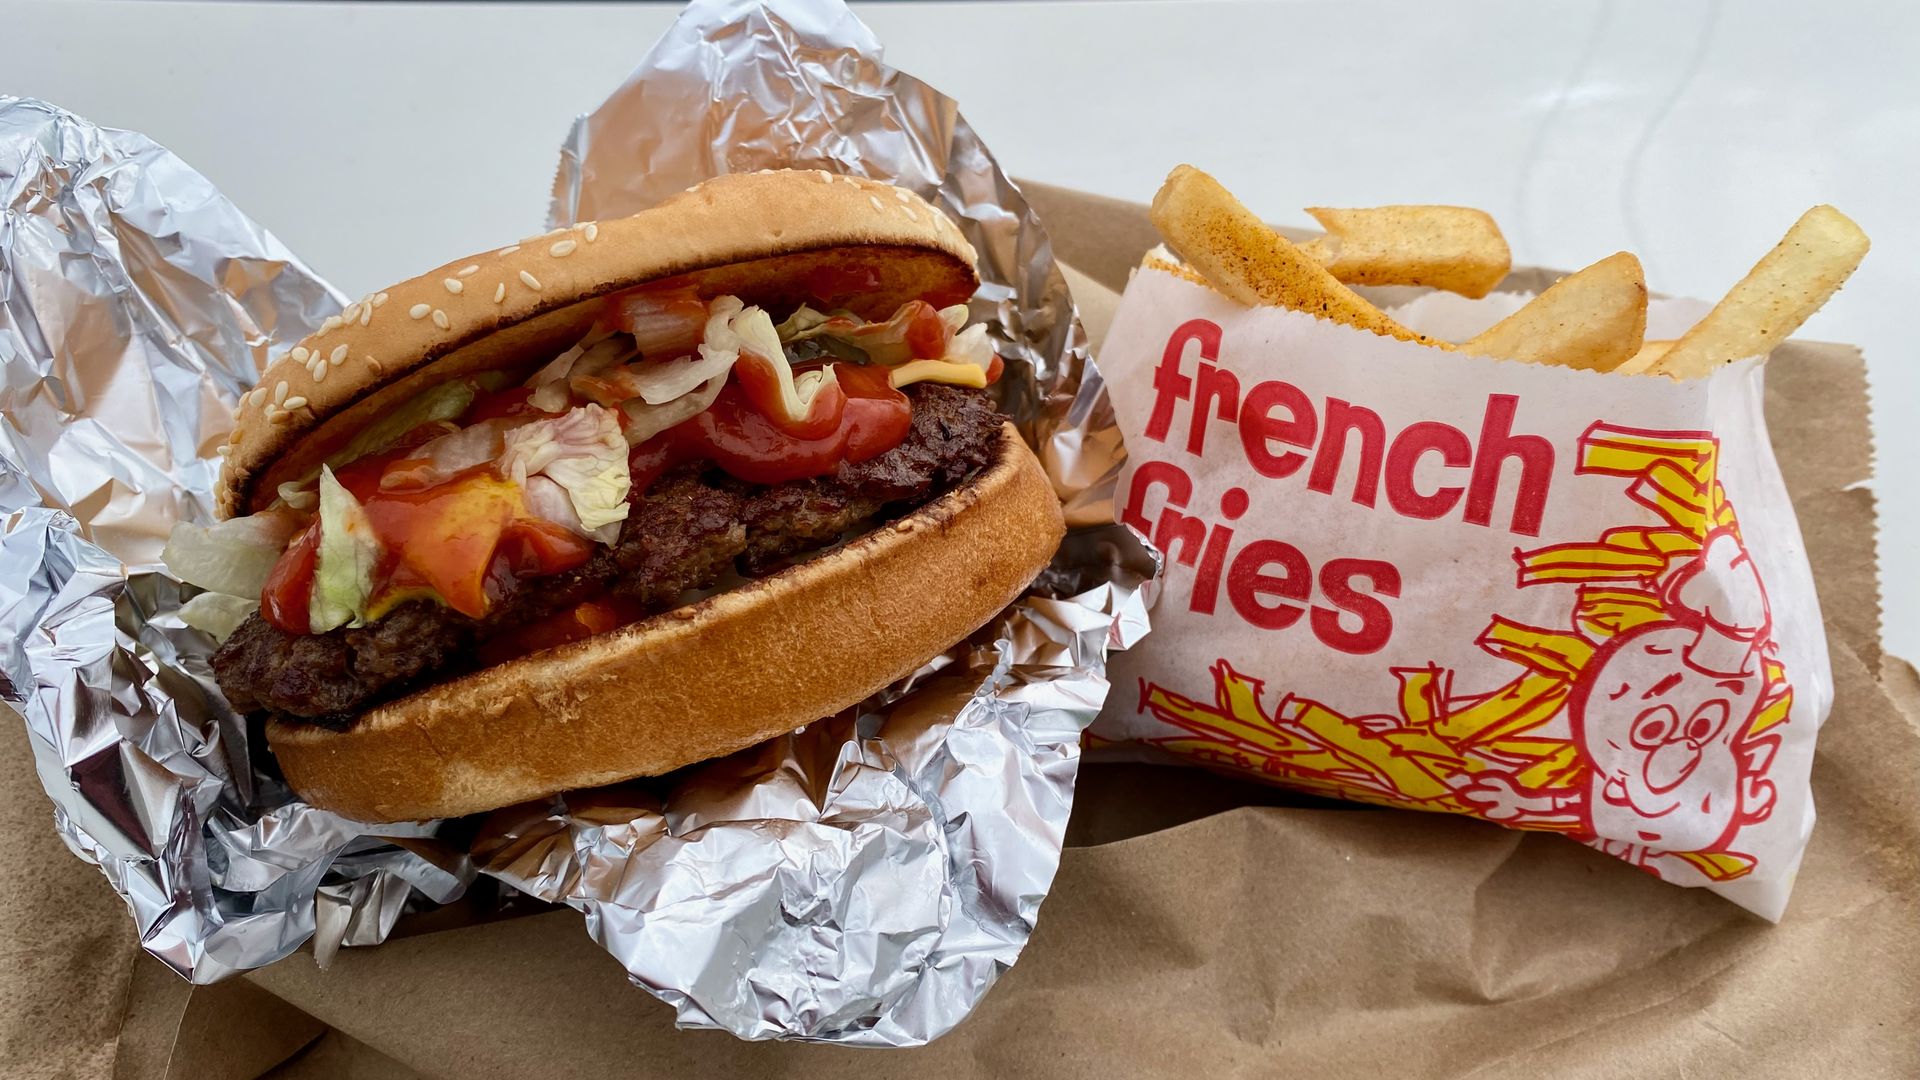 A burger in foil next to a bag of fries that reads "french fries"